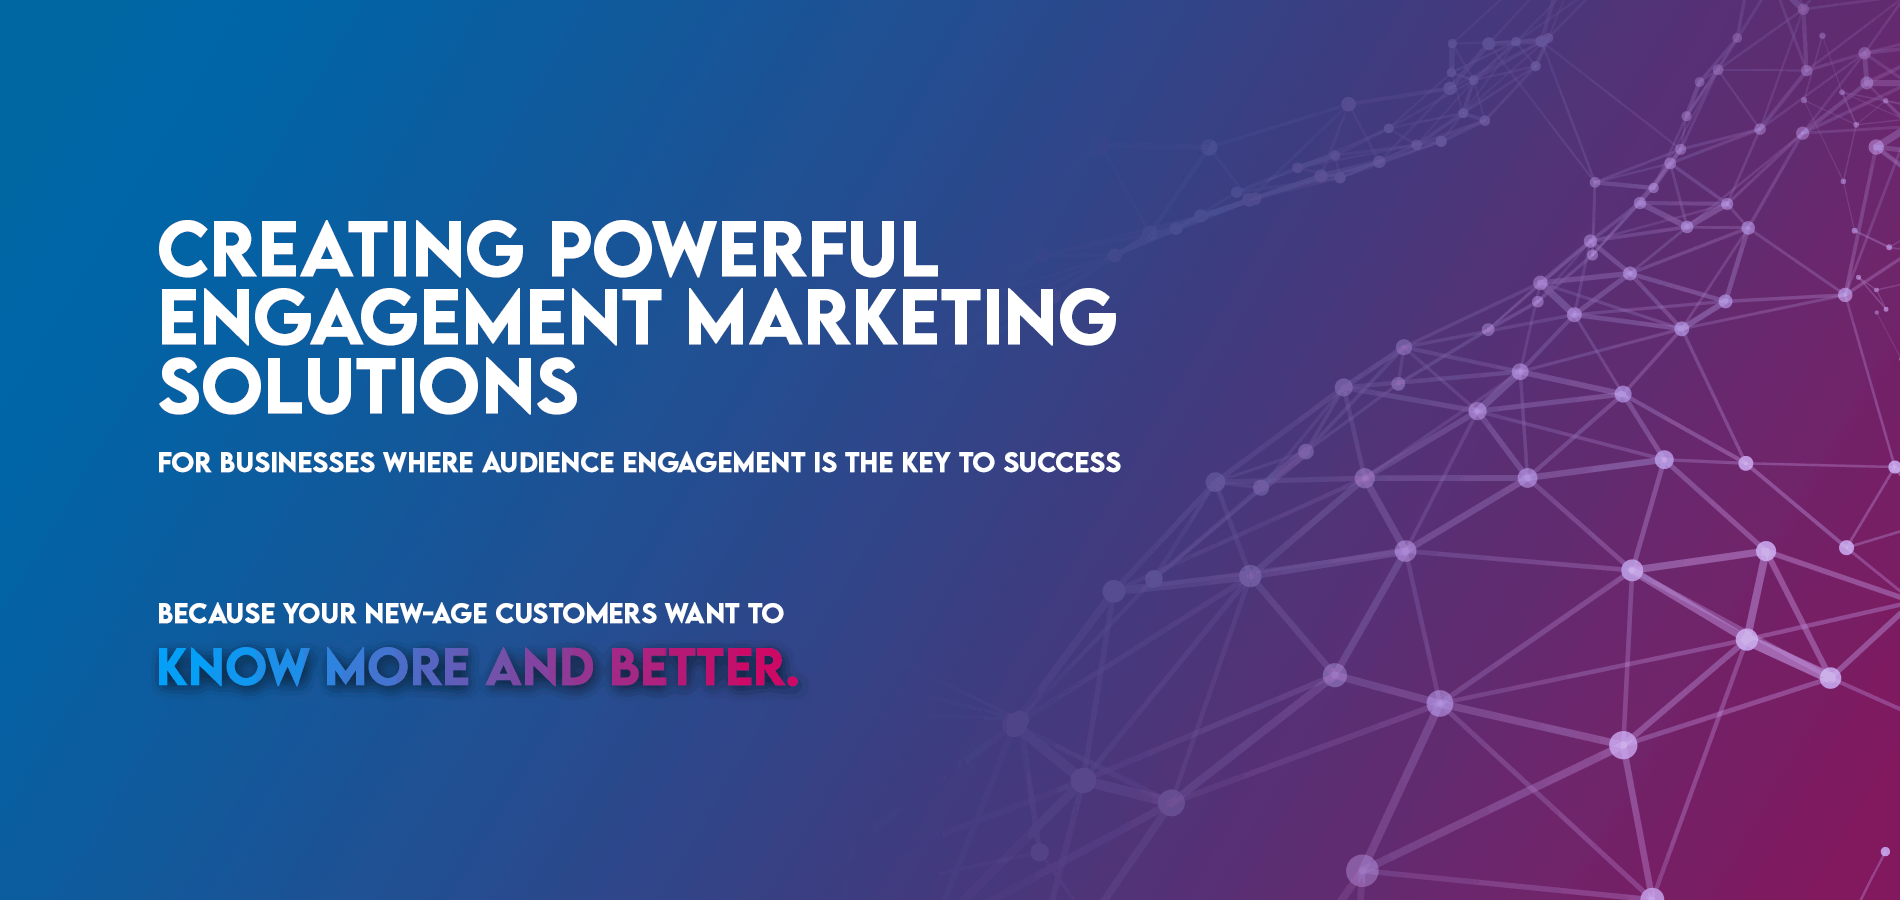 Engagement Marketing Solutions